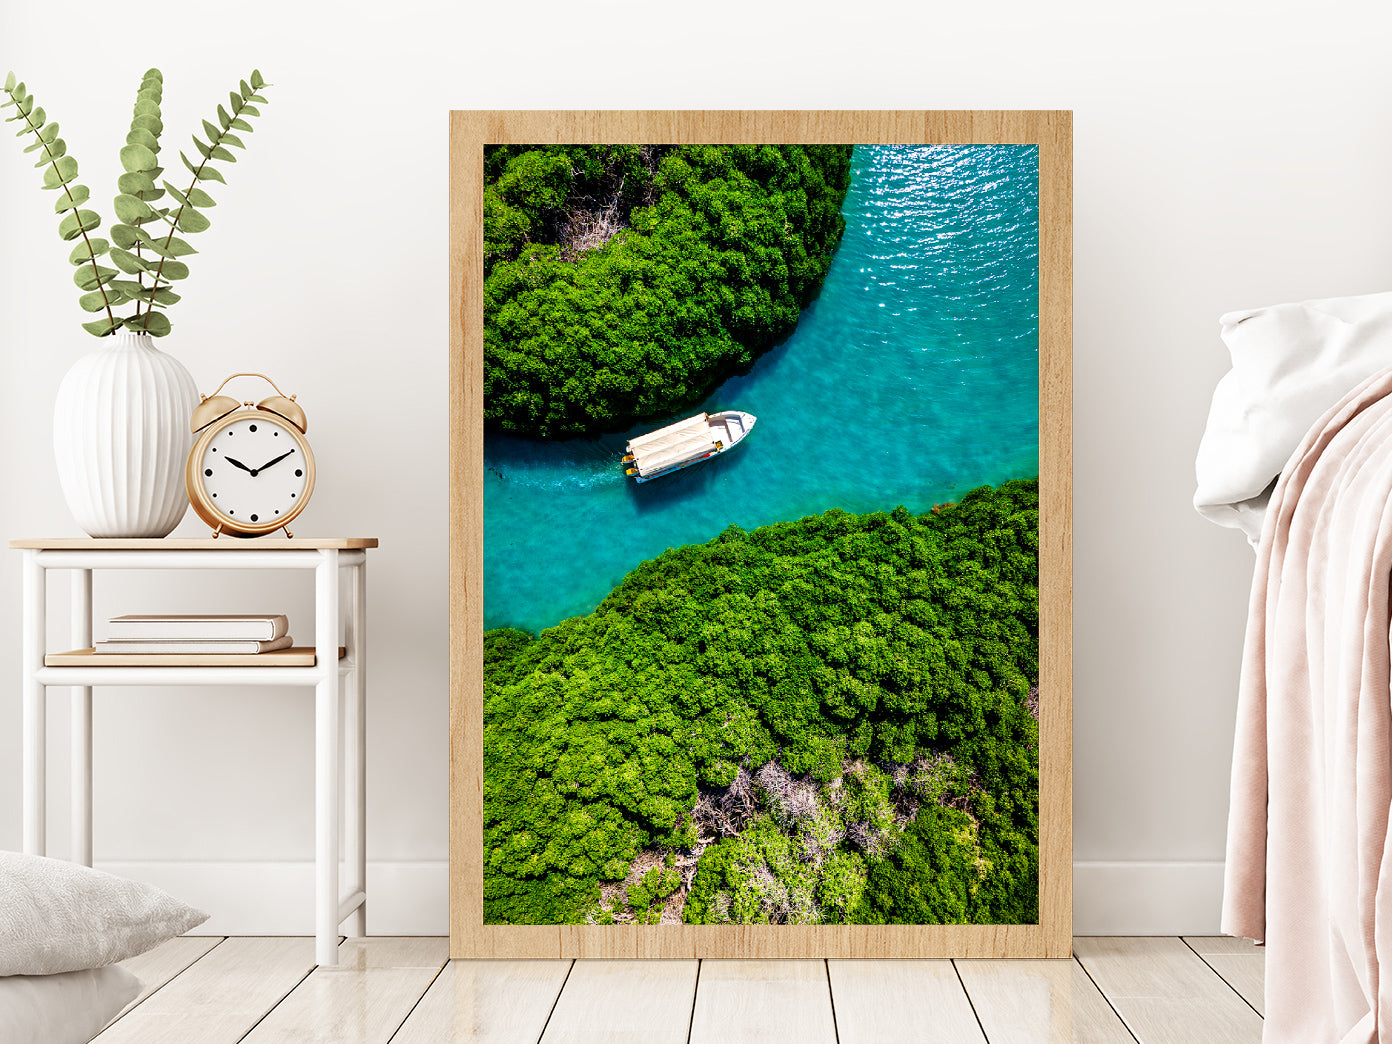 Mangrove Forest Farasan Island Glass Framed Wall Art, Ready to Hang Quality Print Without White Border Oak